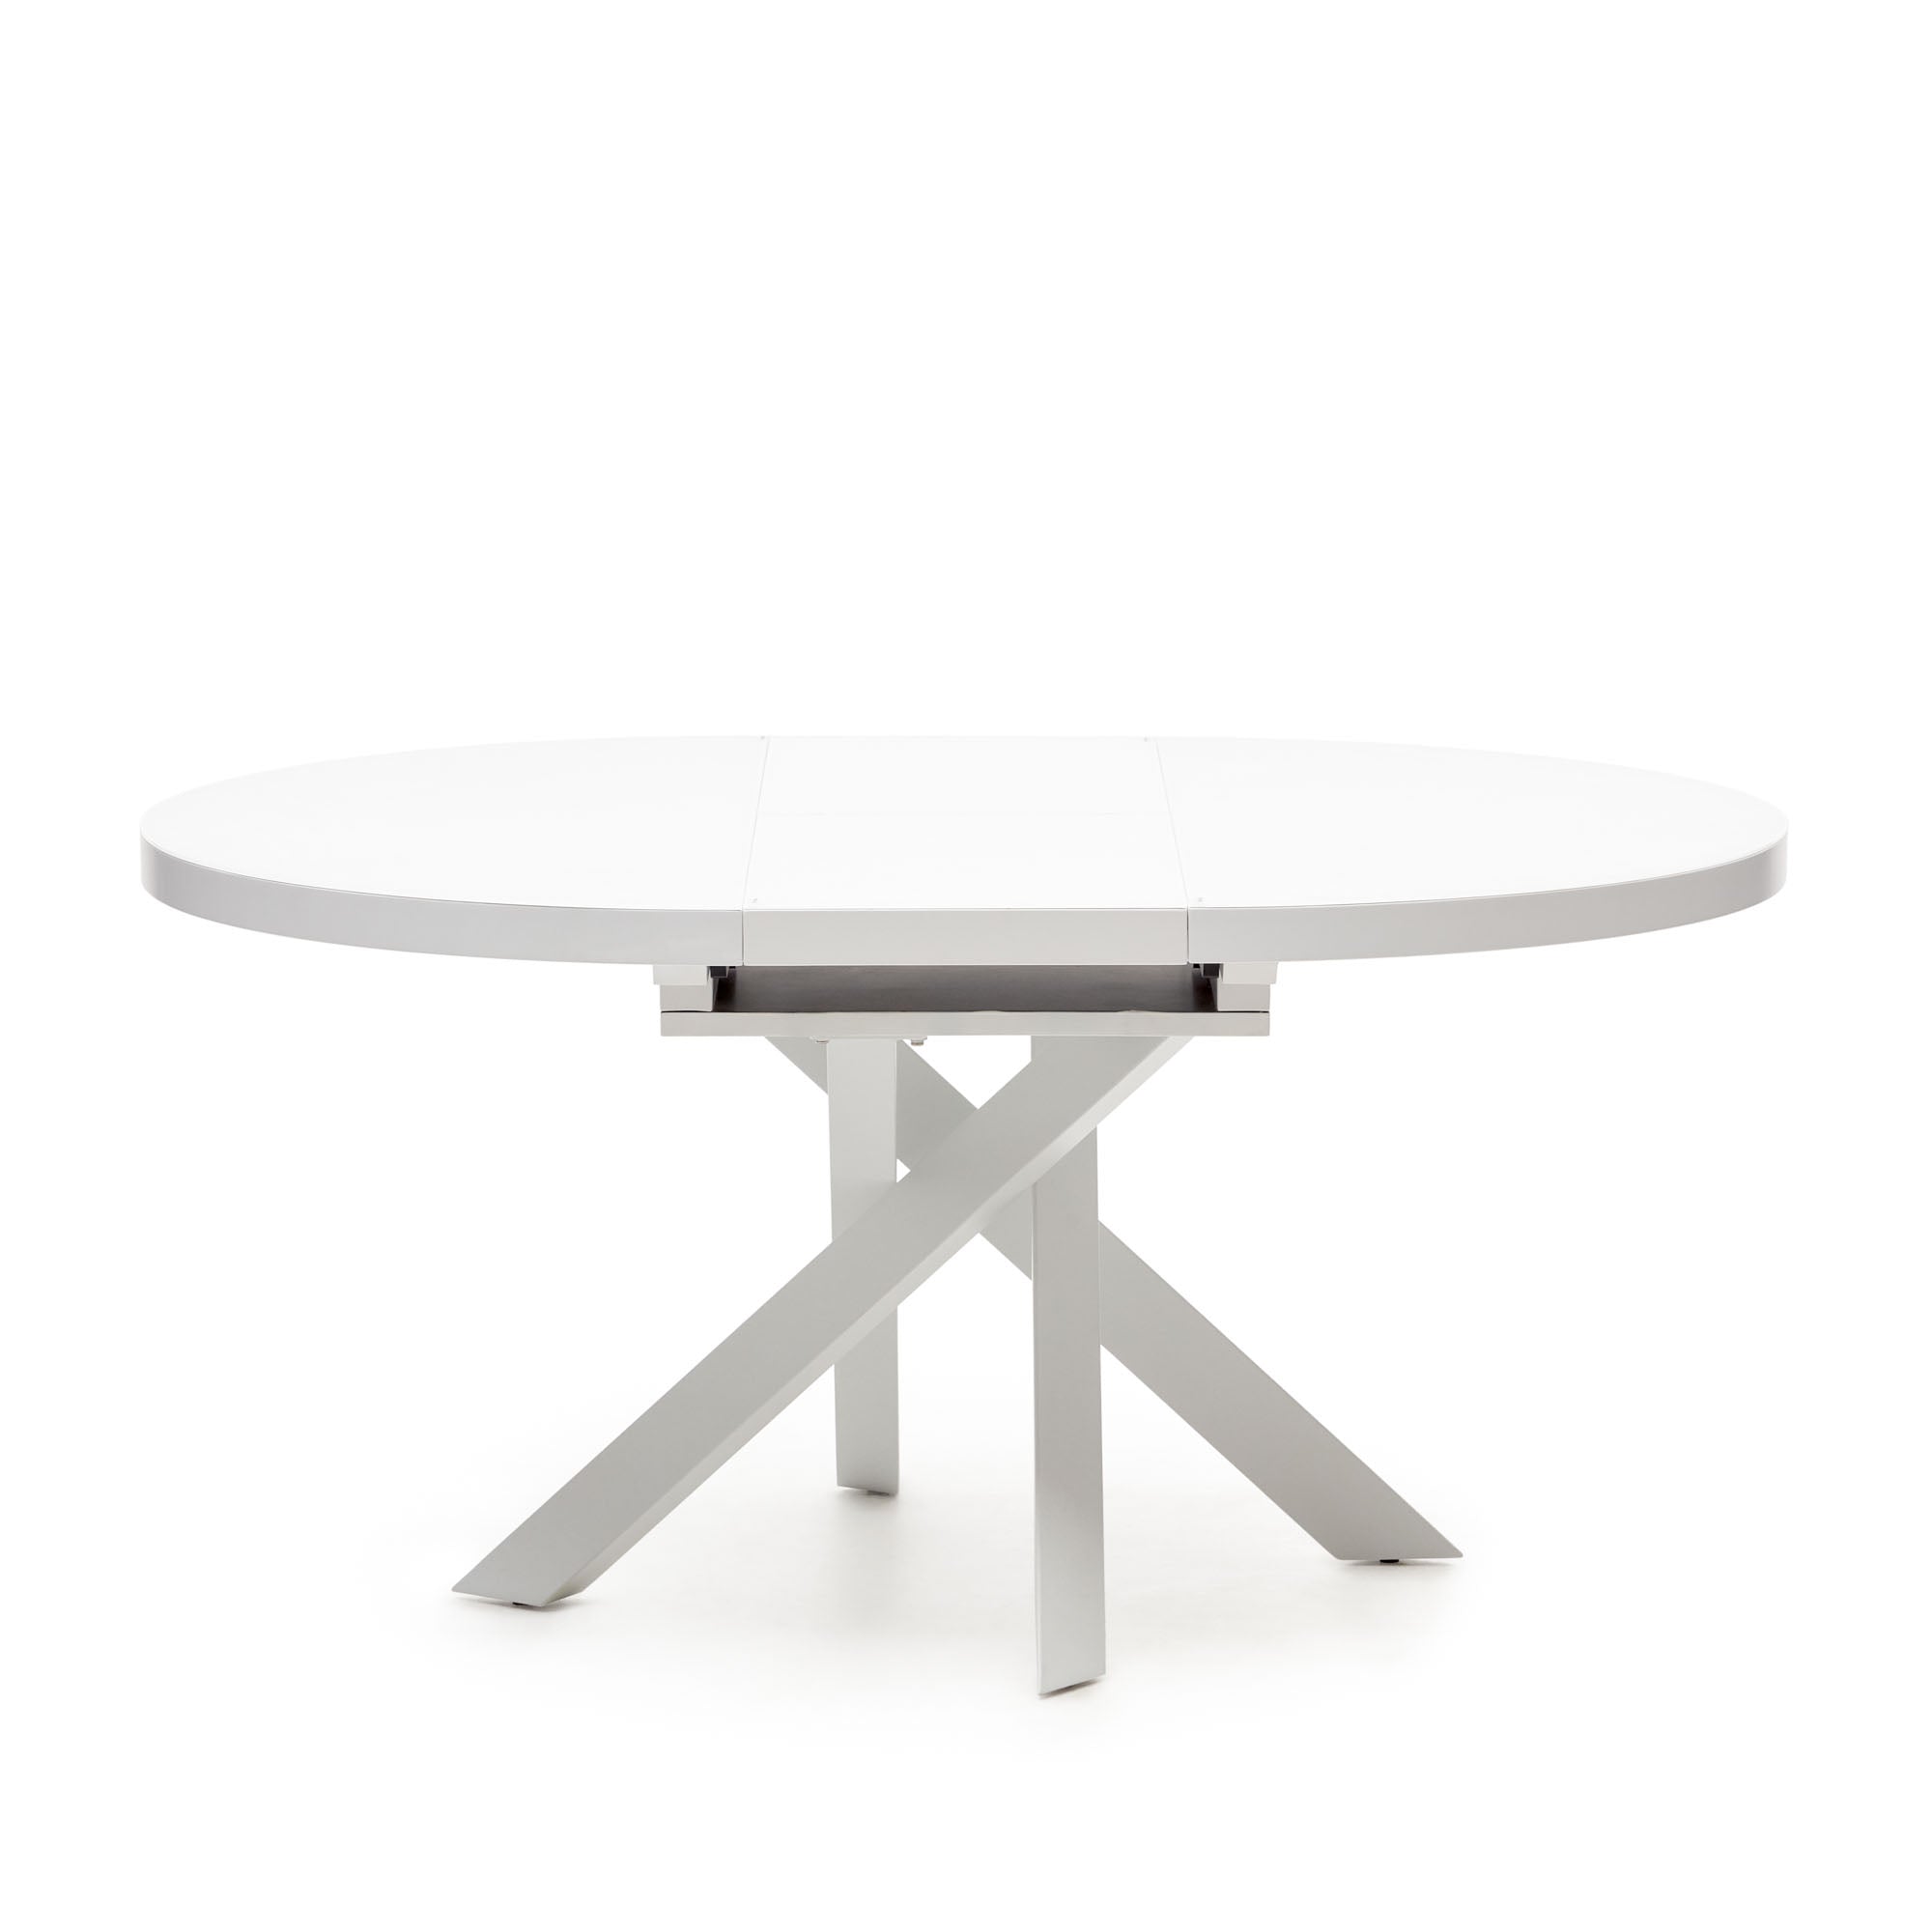 Vashti extendable round table in glass and MDF with steel legs in white, Ø 120(160)x120cm